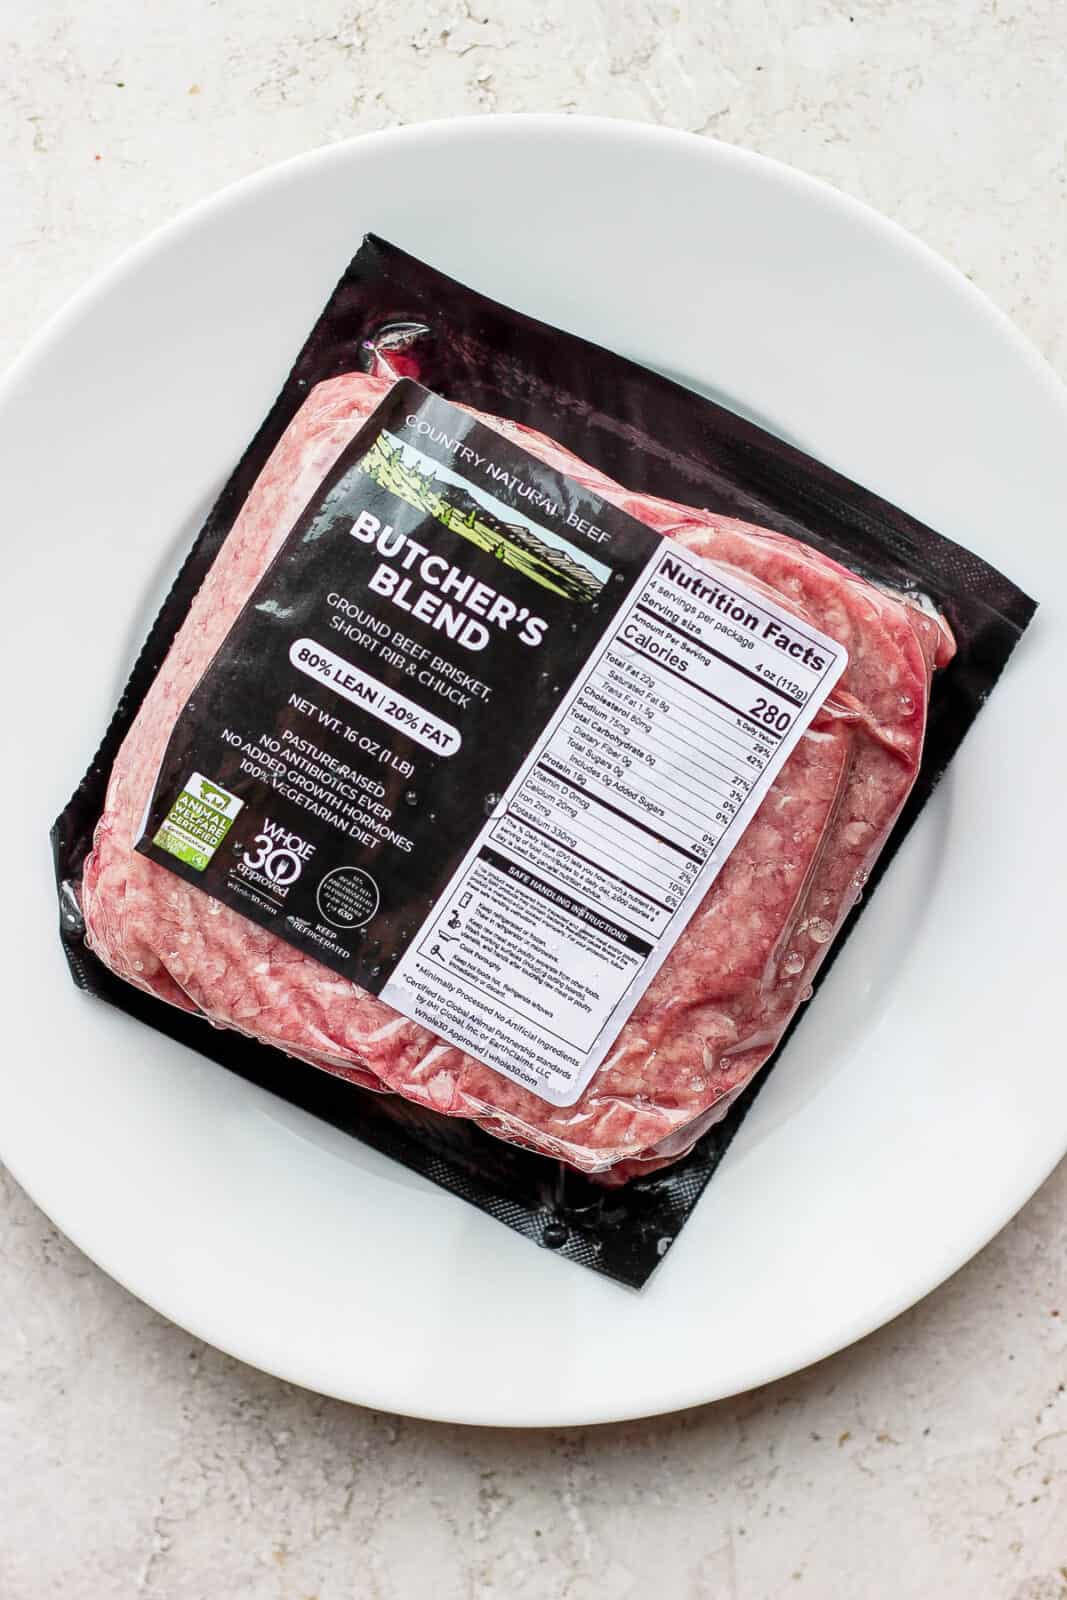 Package of Country Natural Beef's Butcher's Blend ground beef.